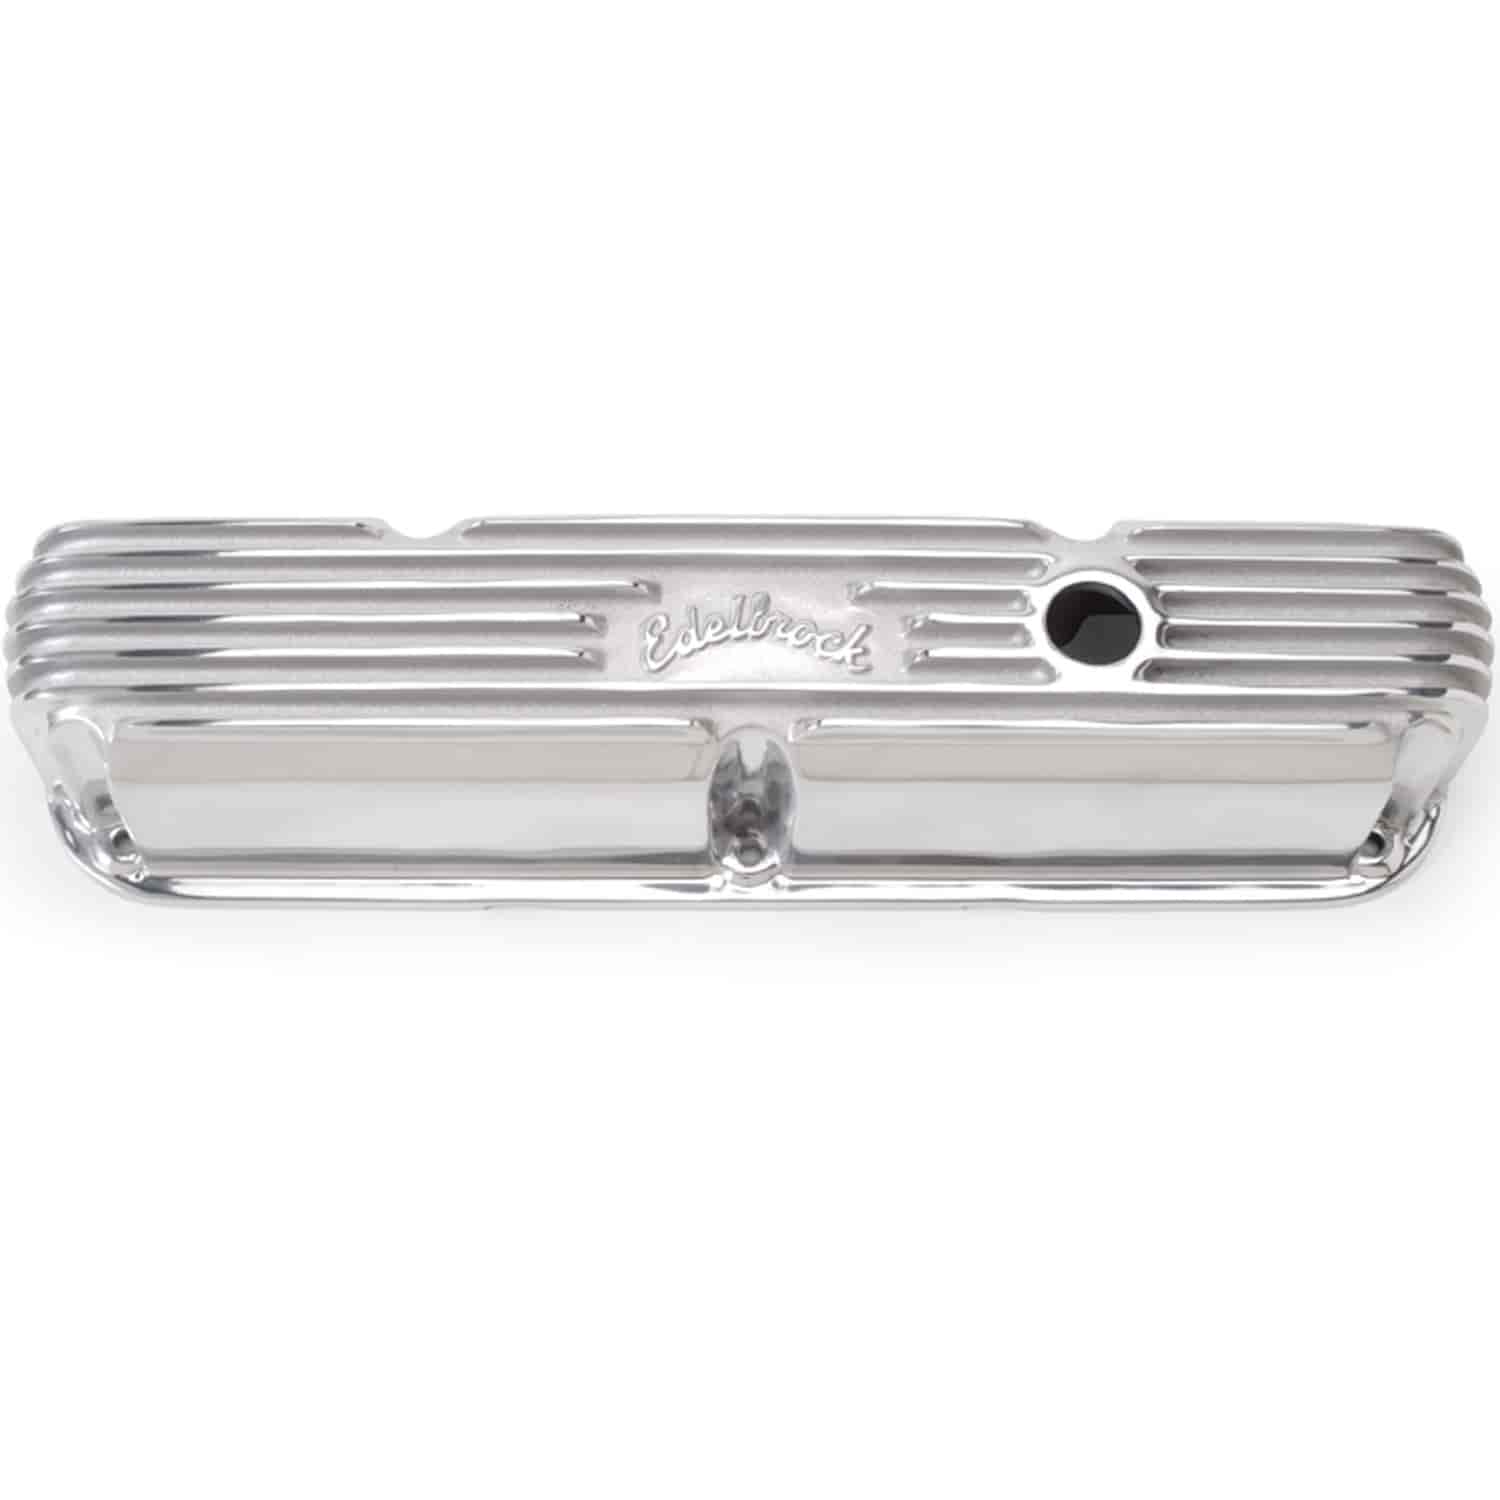 Classic Finned Valve Covers for Small Block Chrysler 318-360 LA Series with Polished Finish